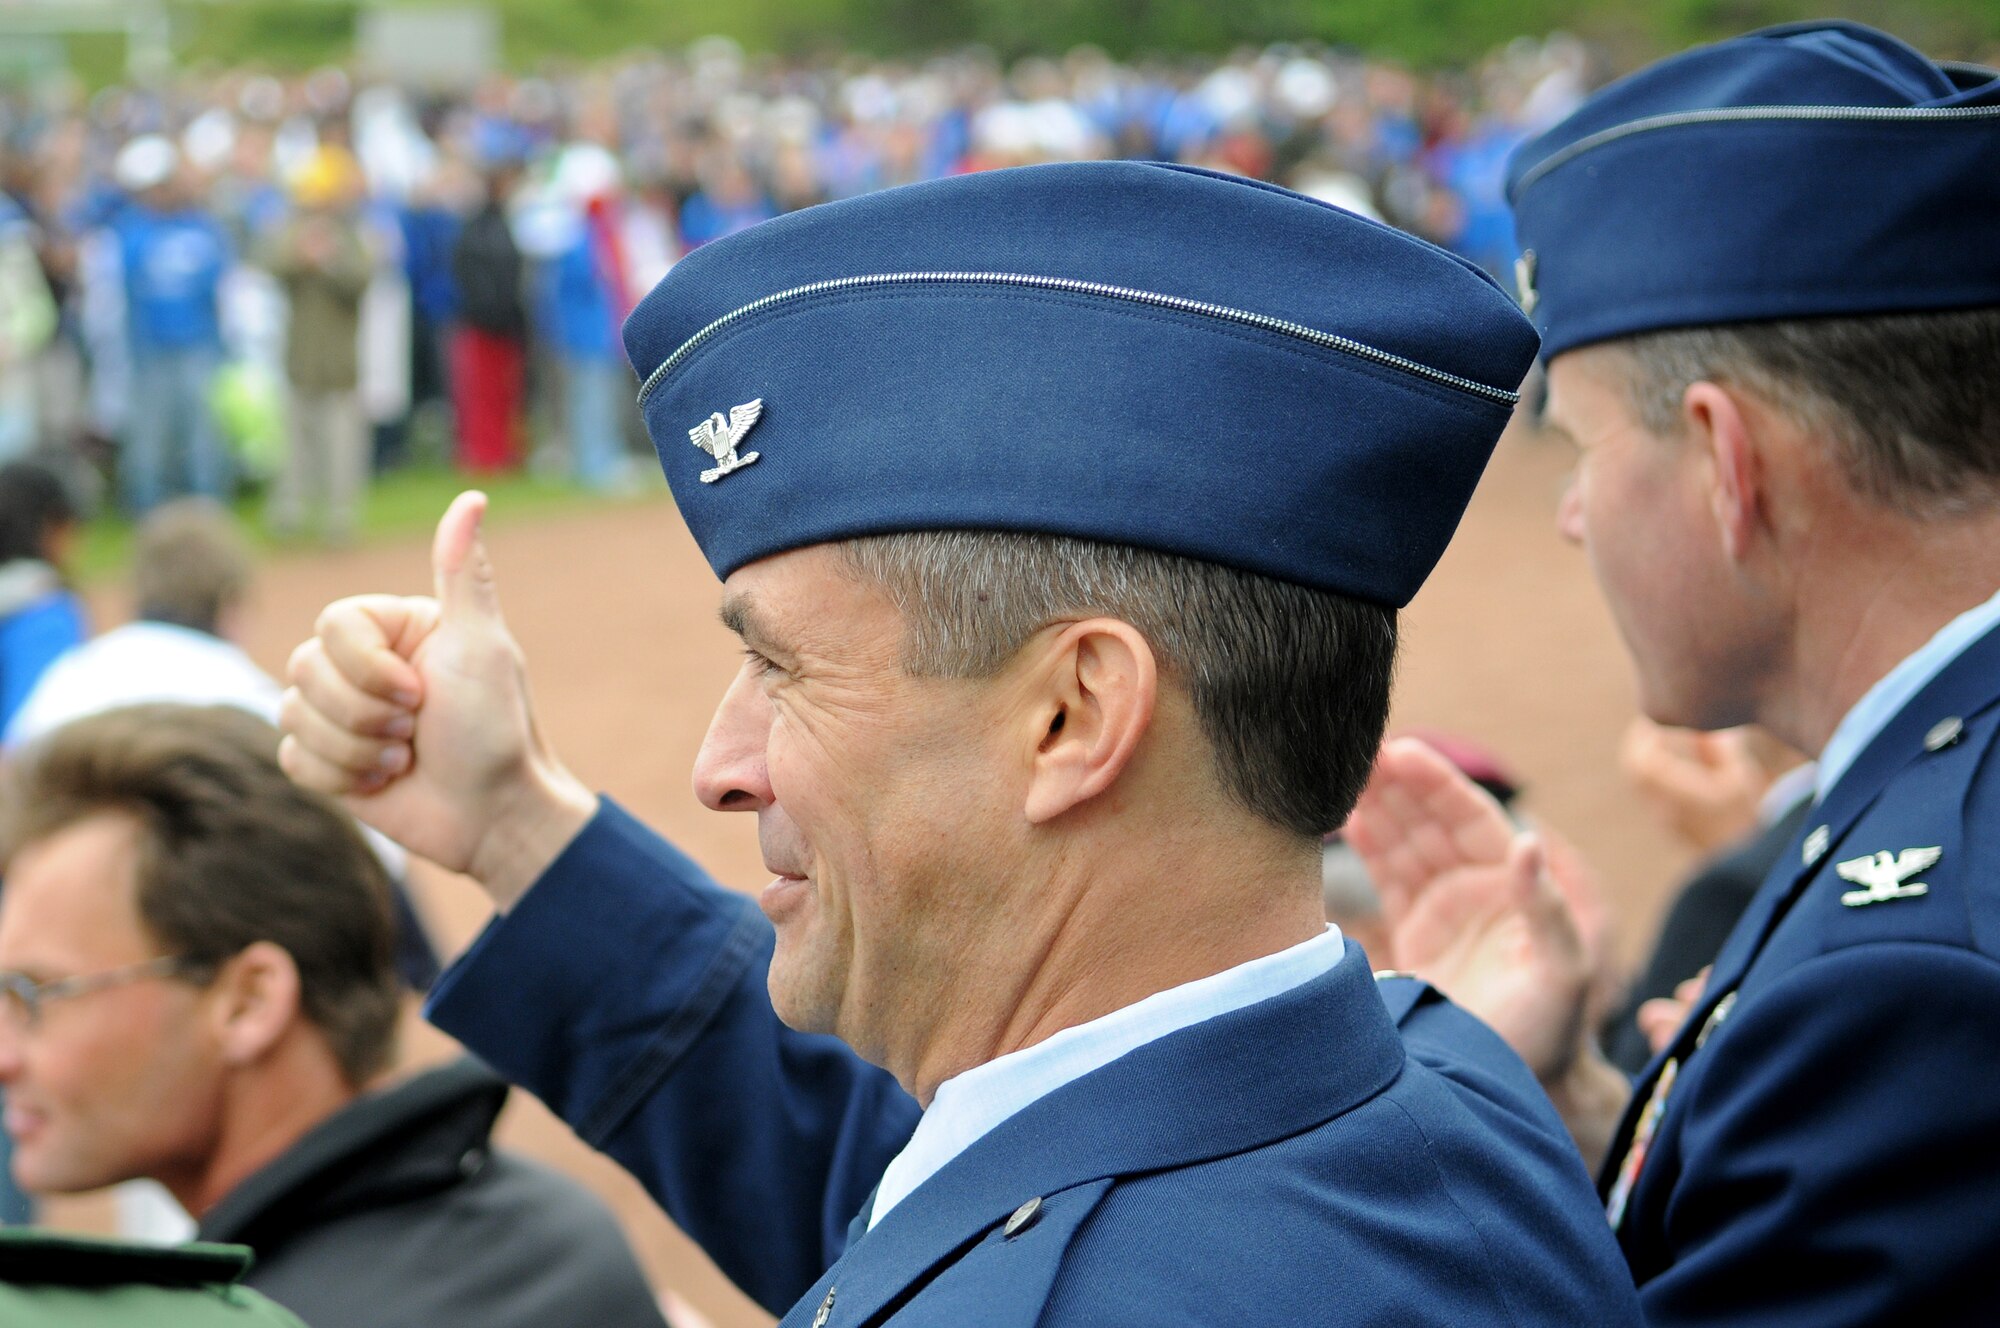 United States Air Force Col. Don Bacon, 435th Air Base Wing commander, gives a thumbs up to all the athletes during the opening parade at the 36th Annual Special Olympics held in Enkenbach-Alsenborn, Germany, May 6, 2009. Special Olympics is an international program of year-round sports training and athletic competition for more than 1.7 million children and adults with disabilities in more than 150 countries including Germany. (U.S. Air Force photo by Airman 1st Class Grovert Fuentes-Contreras)(Released)